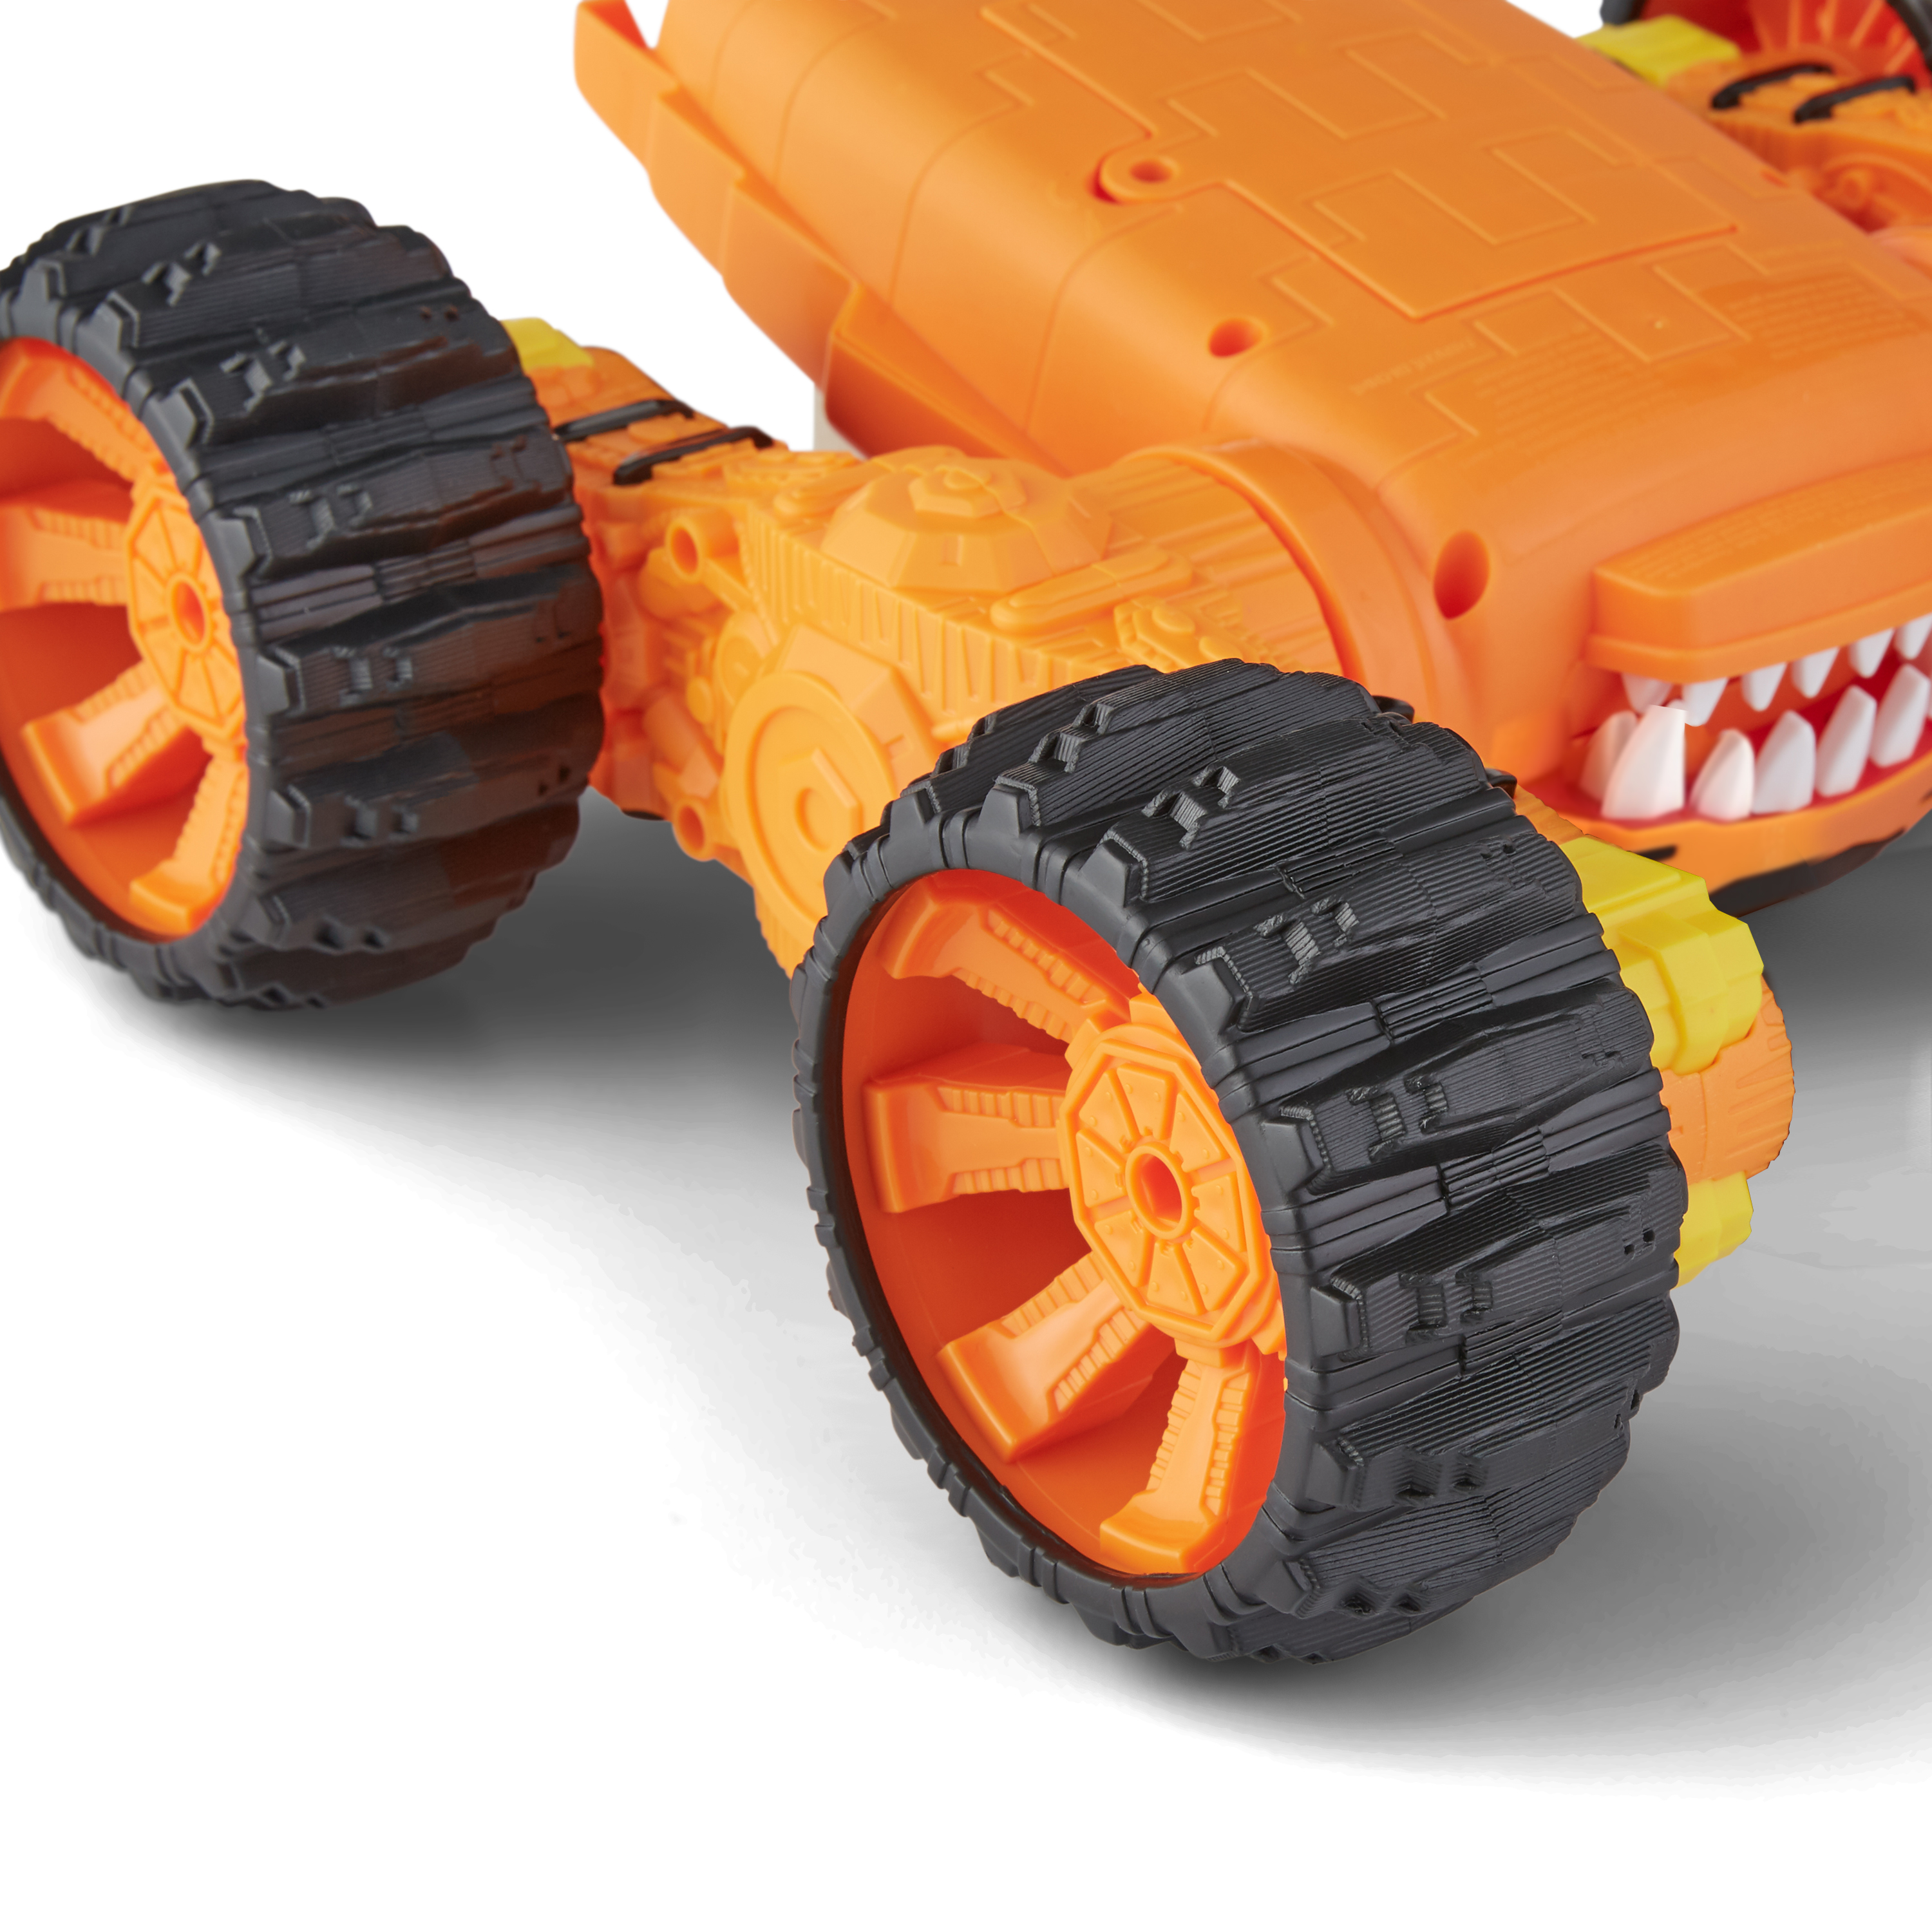 Adventure Force Tiger Twister Radio Controlled Stunt Vehicle - image 5 of 6